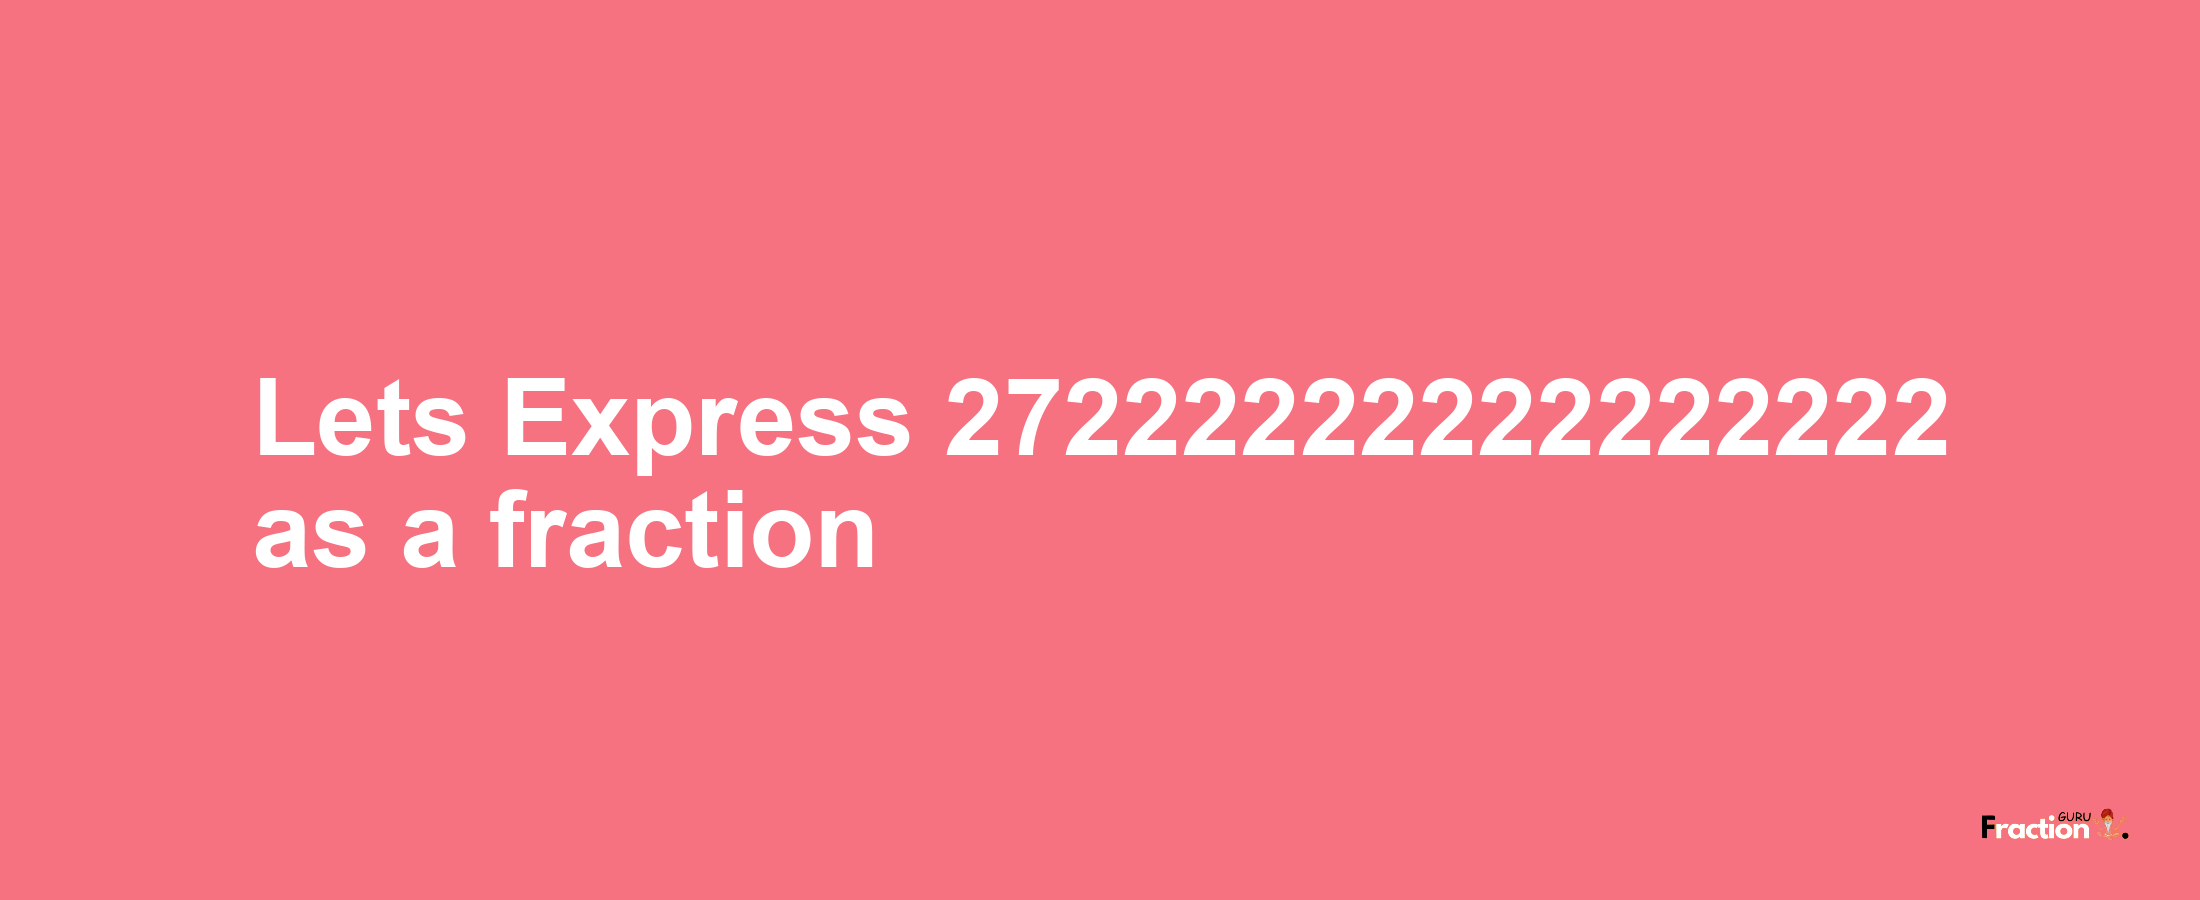 Lets Express 27222222222222222 as afraction